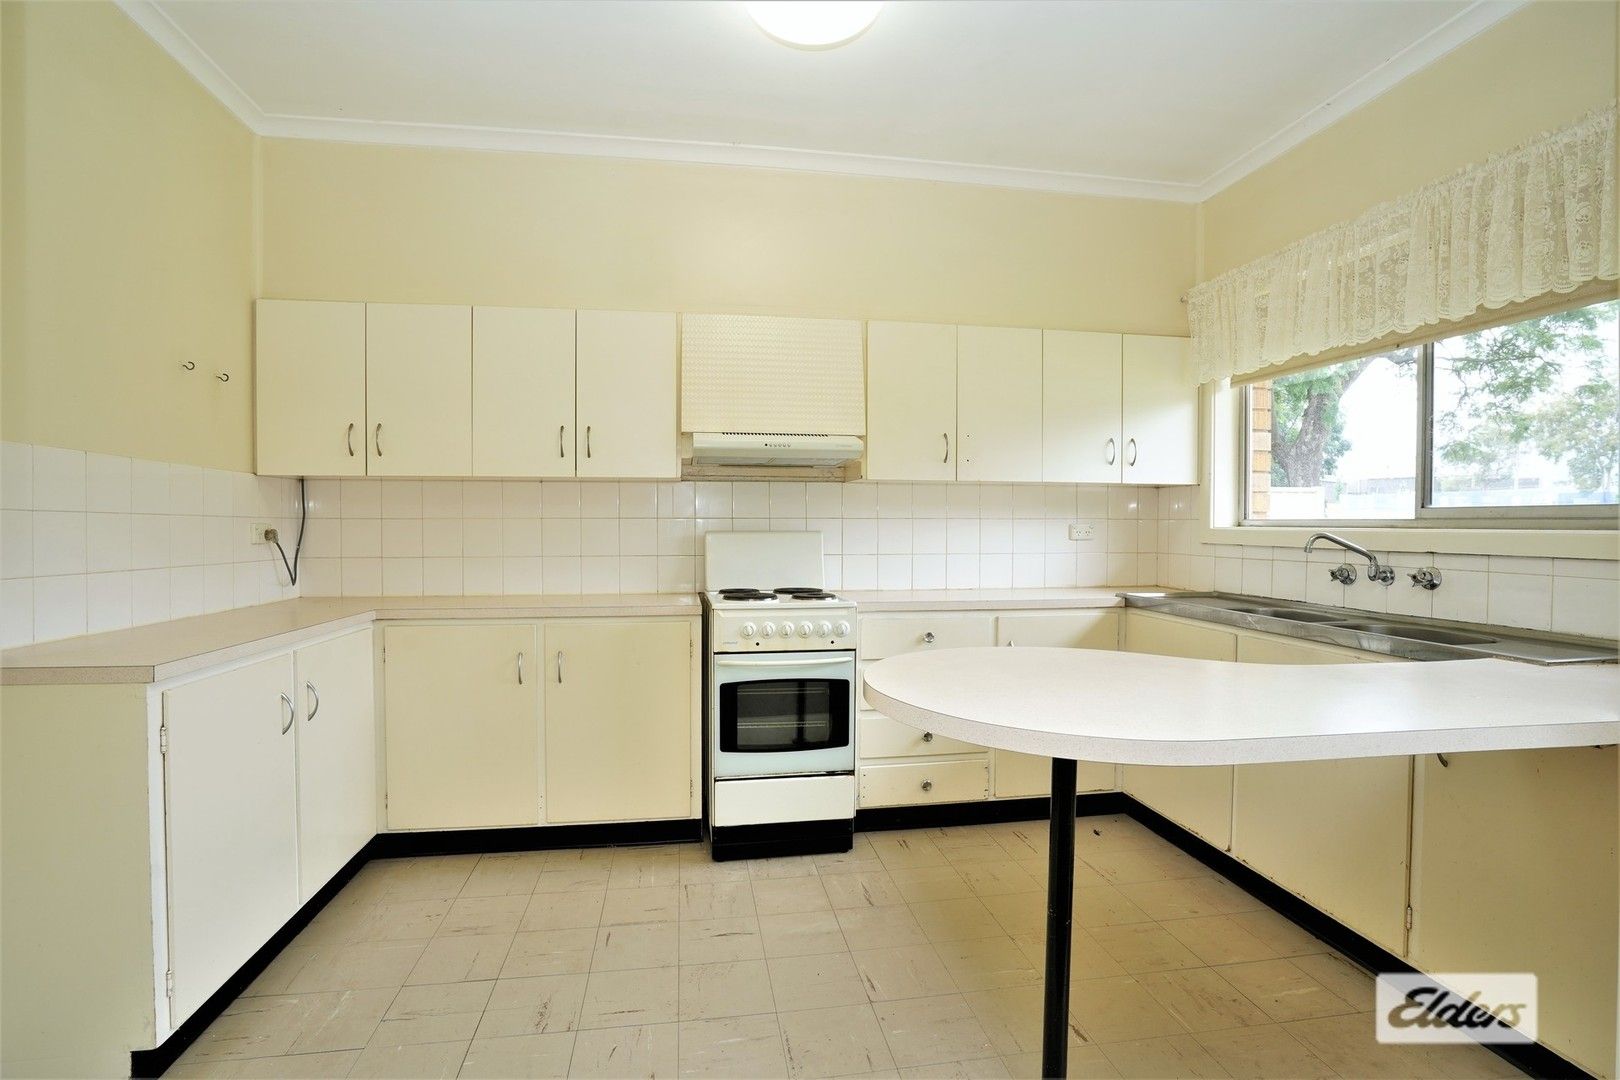 2 bedrooms Apartment / Unit / Flat in 2/18 Animoo Avenue GRIFFITH NSW, 2680